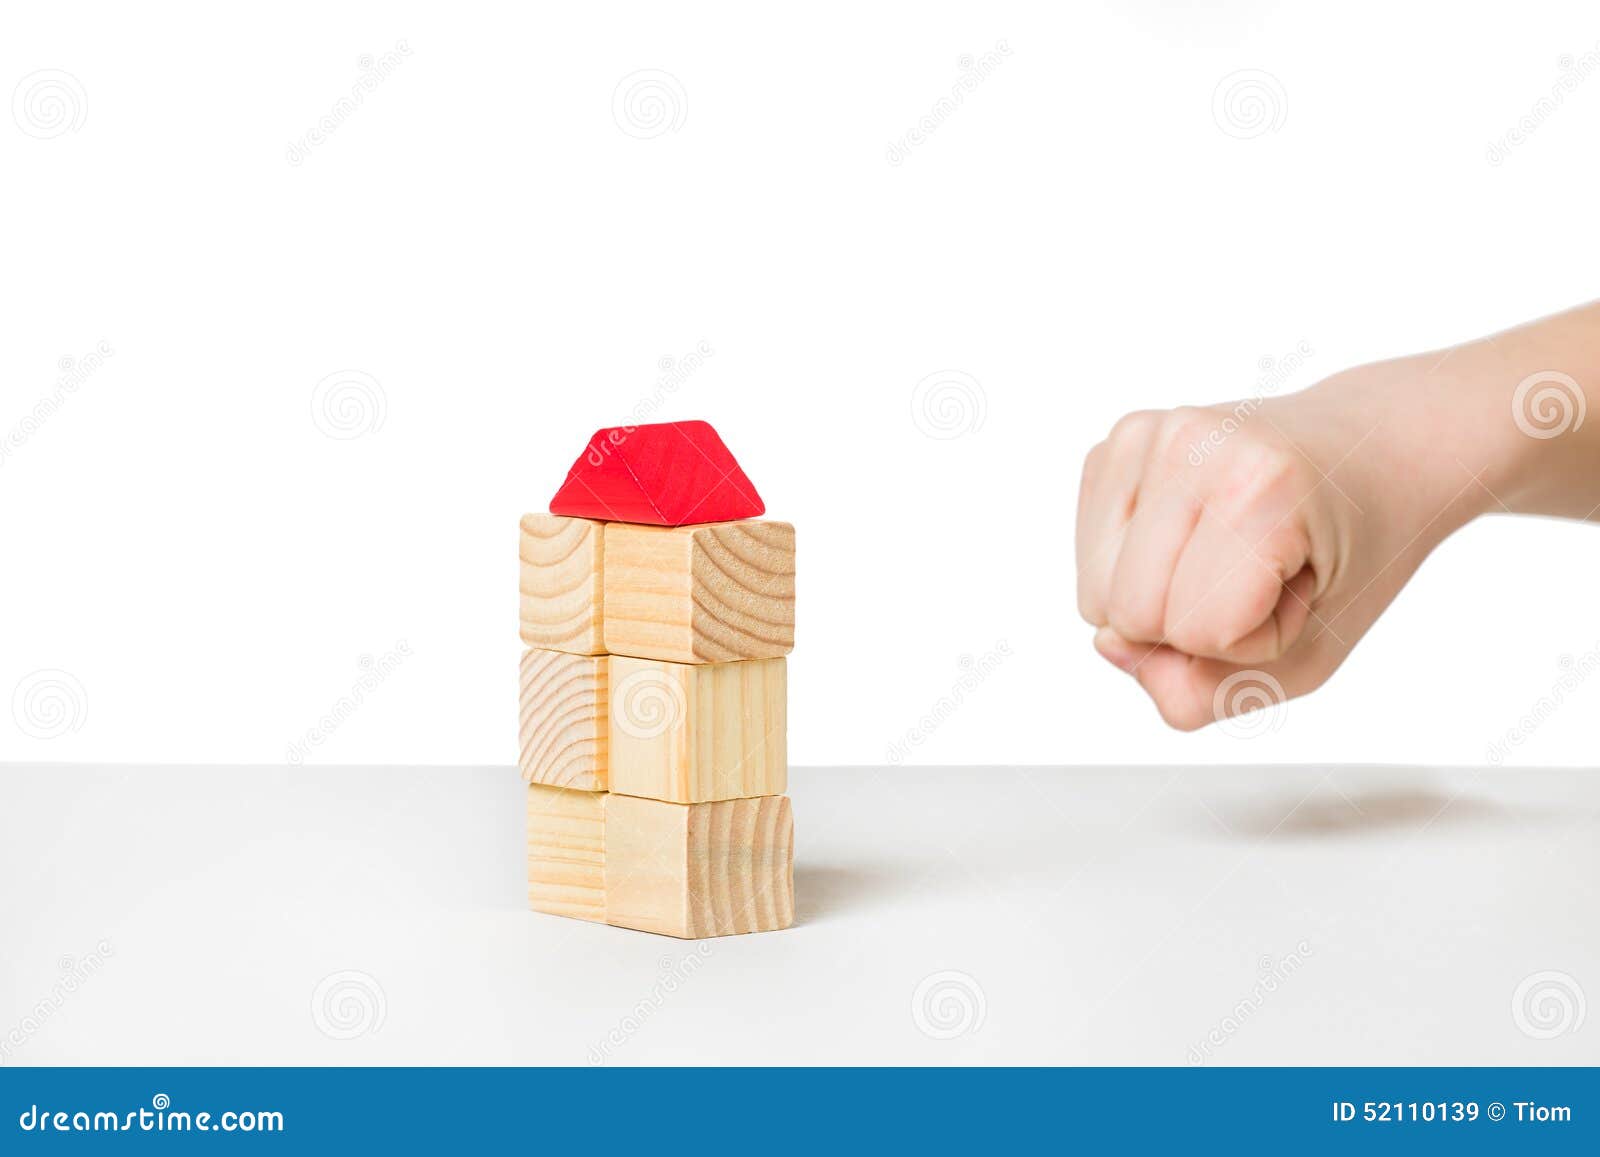 hand about to destroy house made of wooden blocks